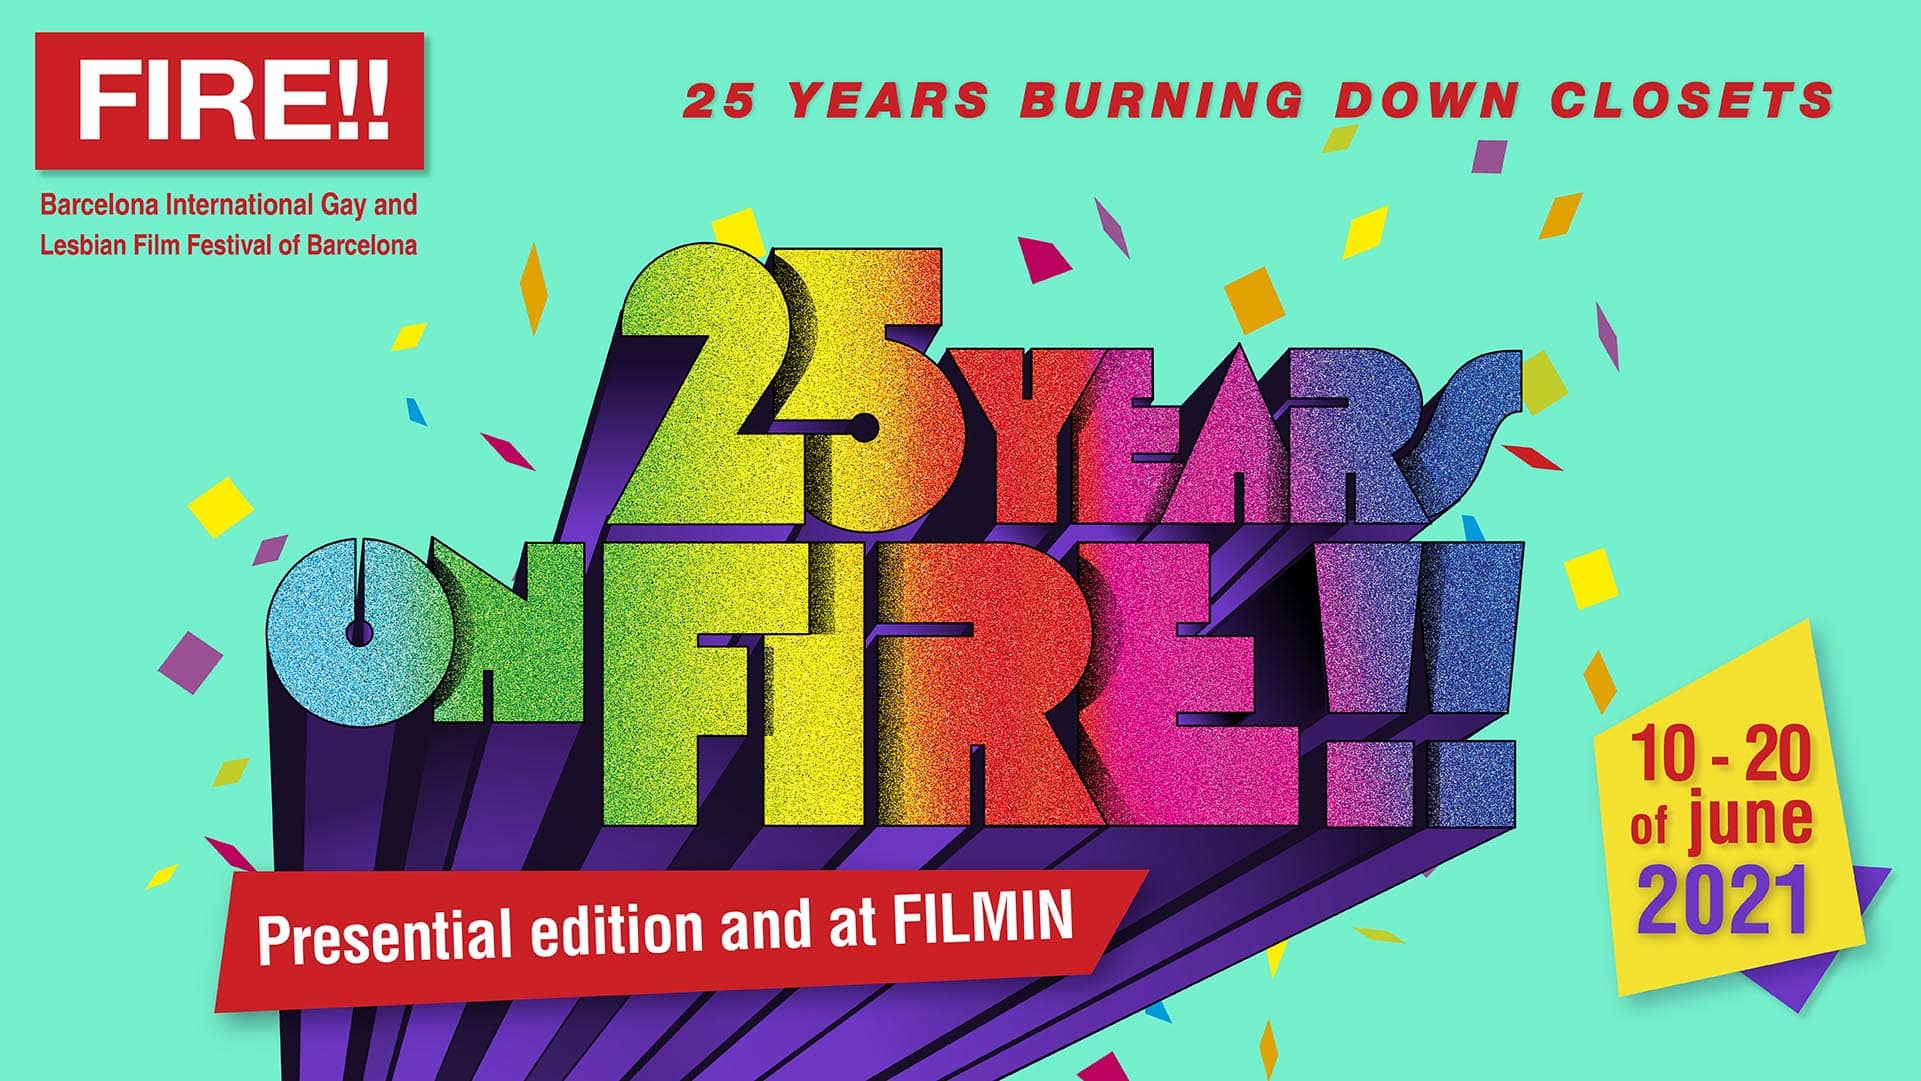 25 years on FIRE!! Presential edition and at FILMIN